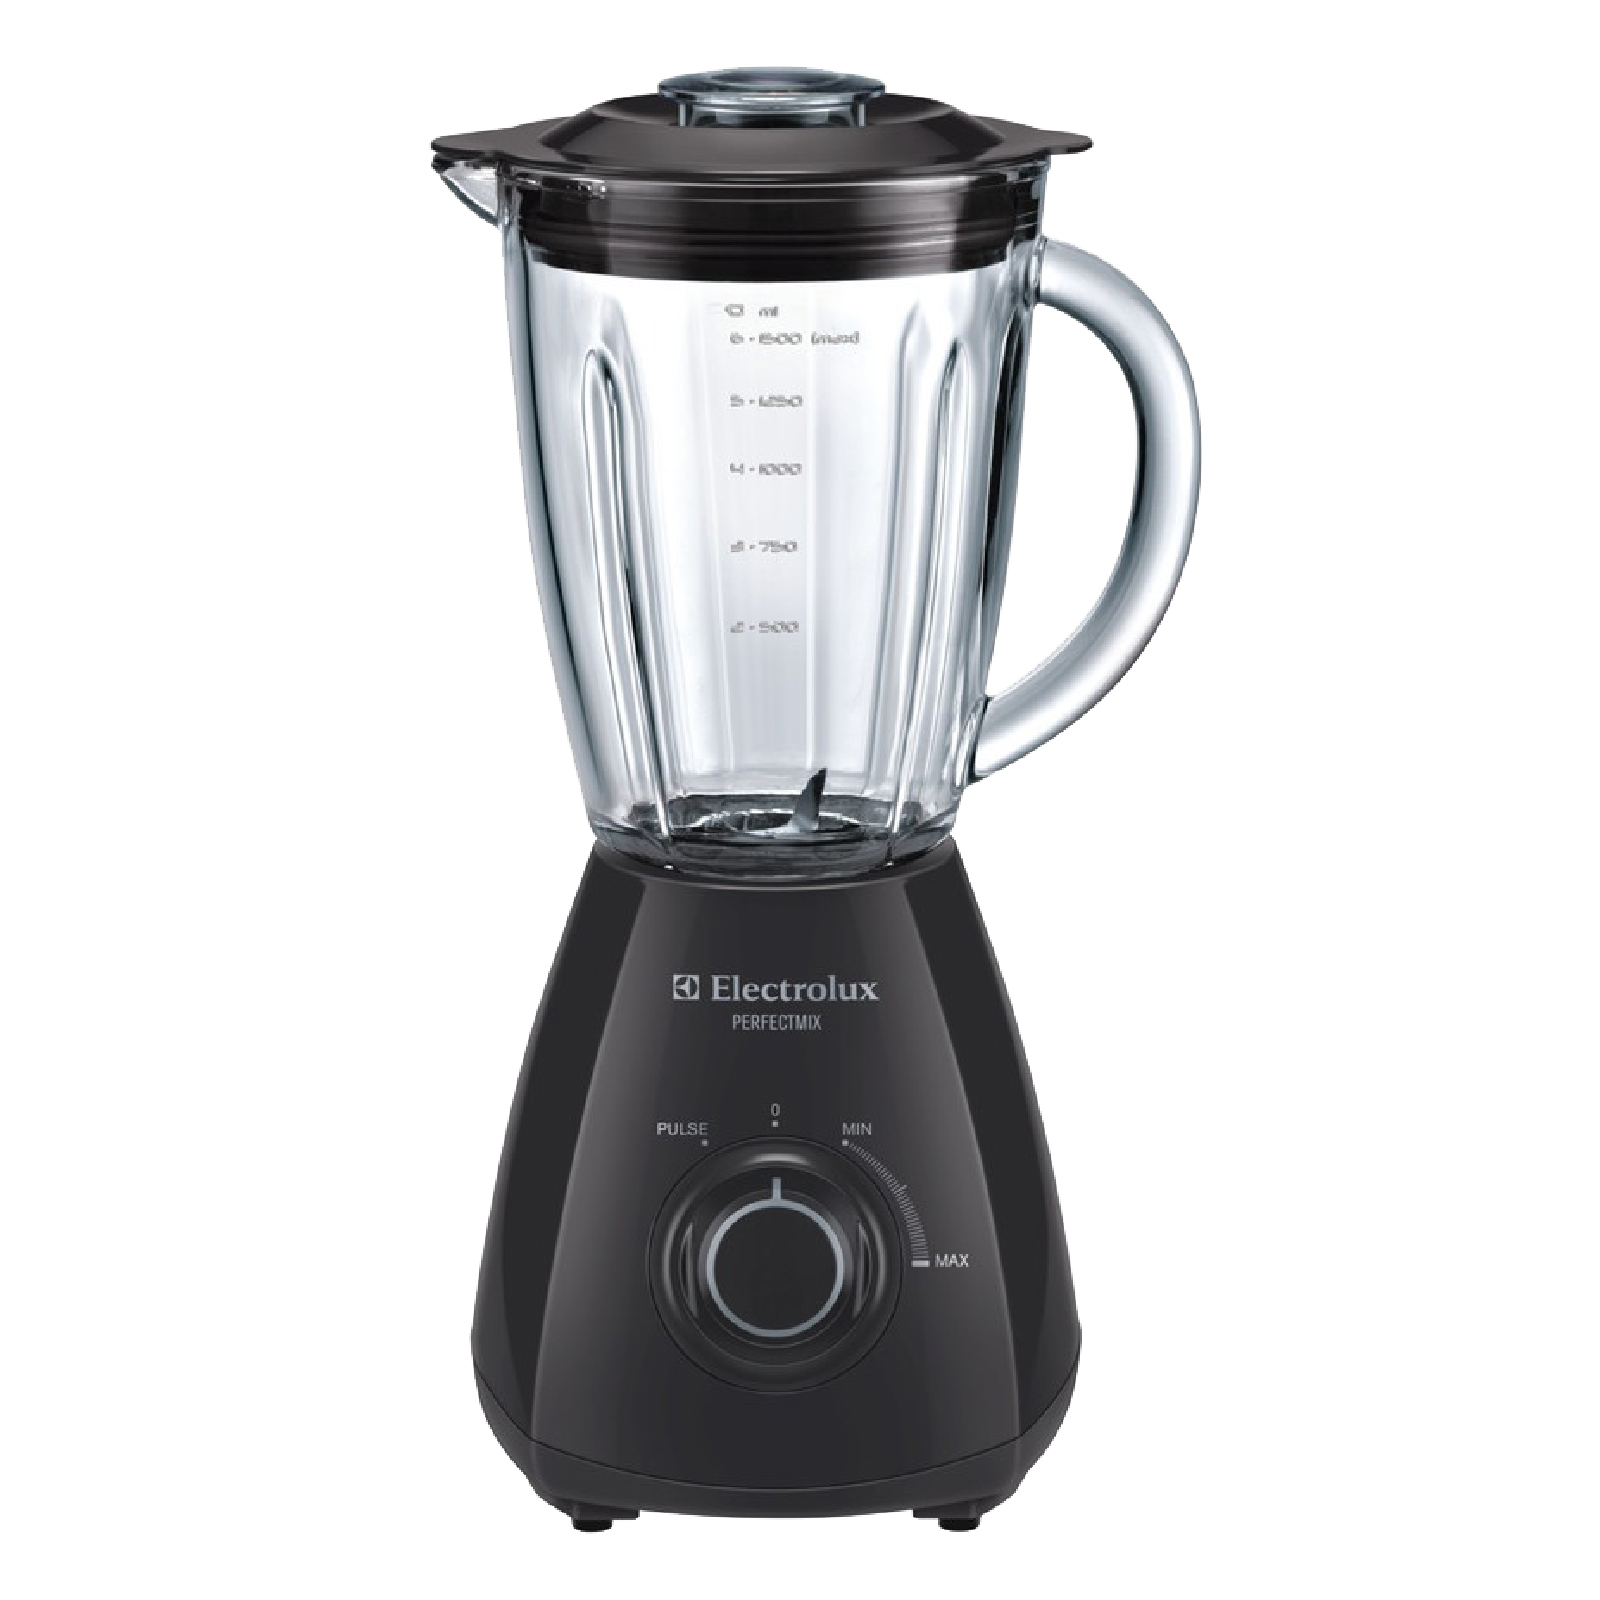 Electrolux Blender With Ice Crush Feature, ESB2300